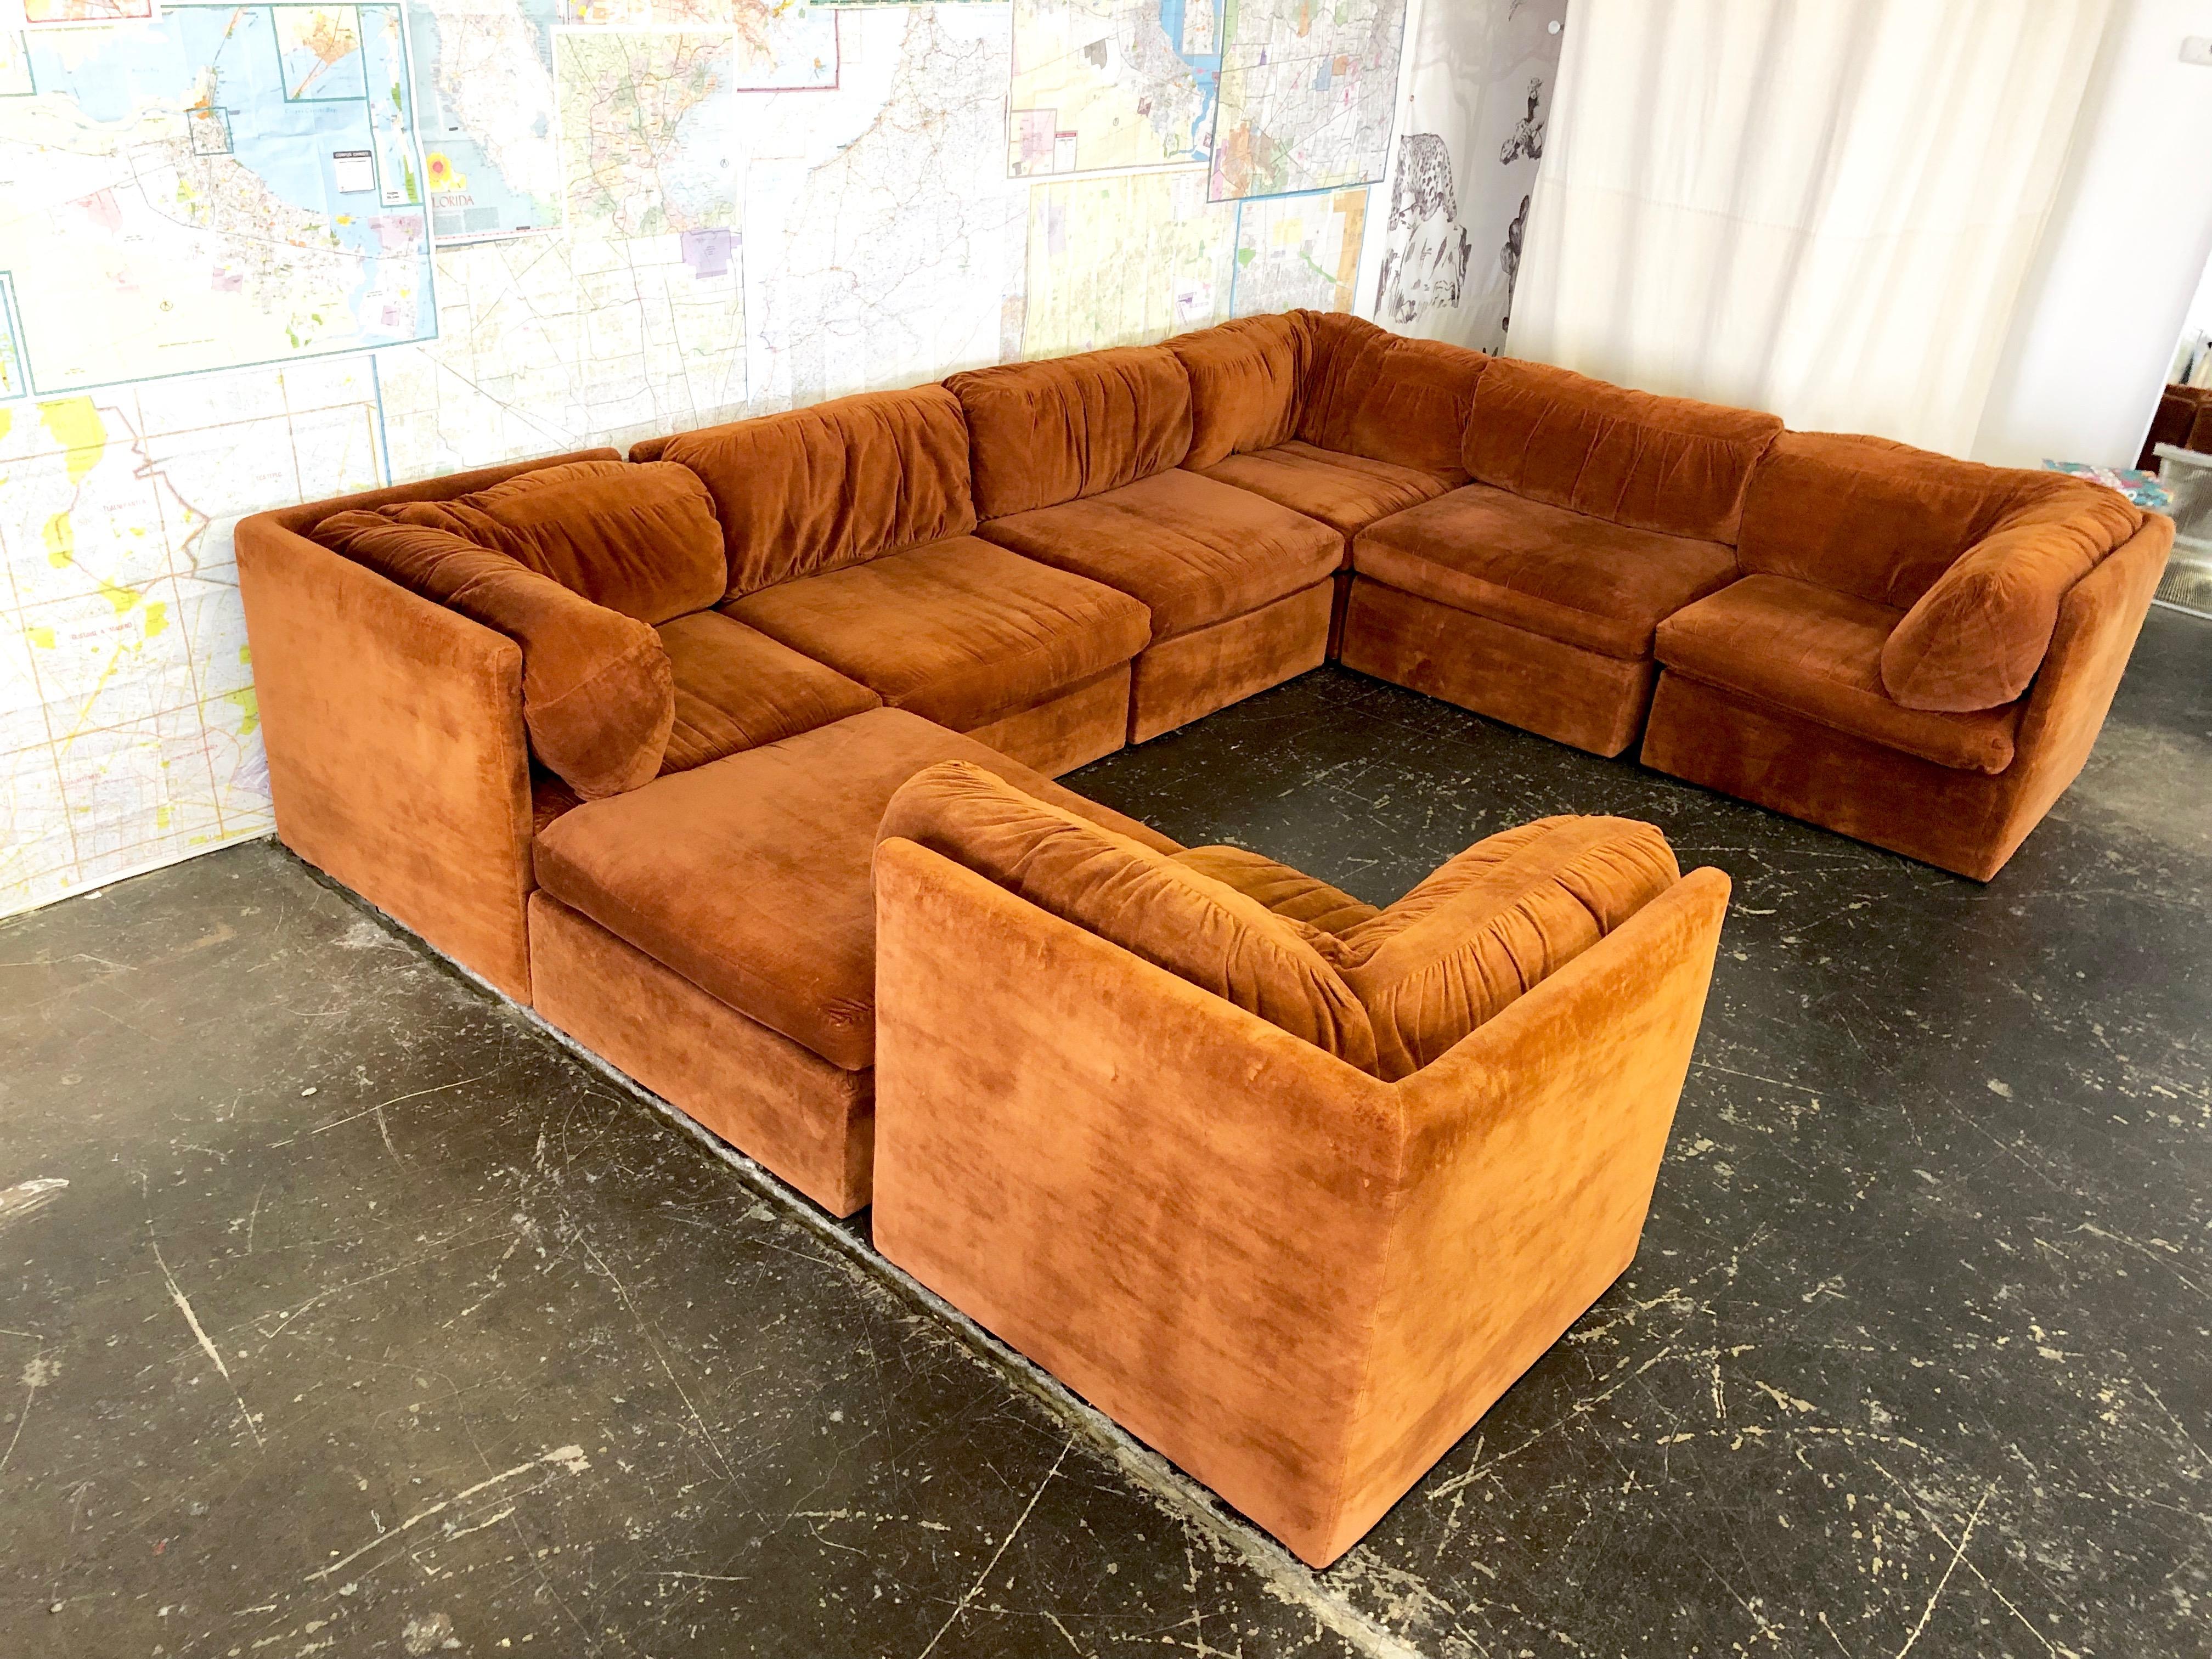 Eight-Piece Modular sofa by Milo Baughman for Thayer Coggin. Sofa is in good vintage condition with wear from age an use. 
Sofa can be used as-is but would recommend new upholstery, circa 1970s

Fabric is a reddish brown color and appears more